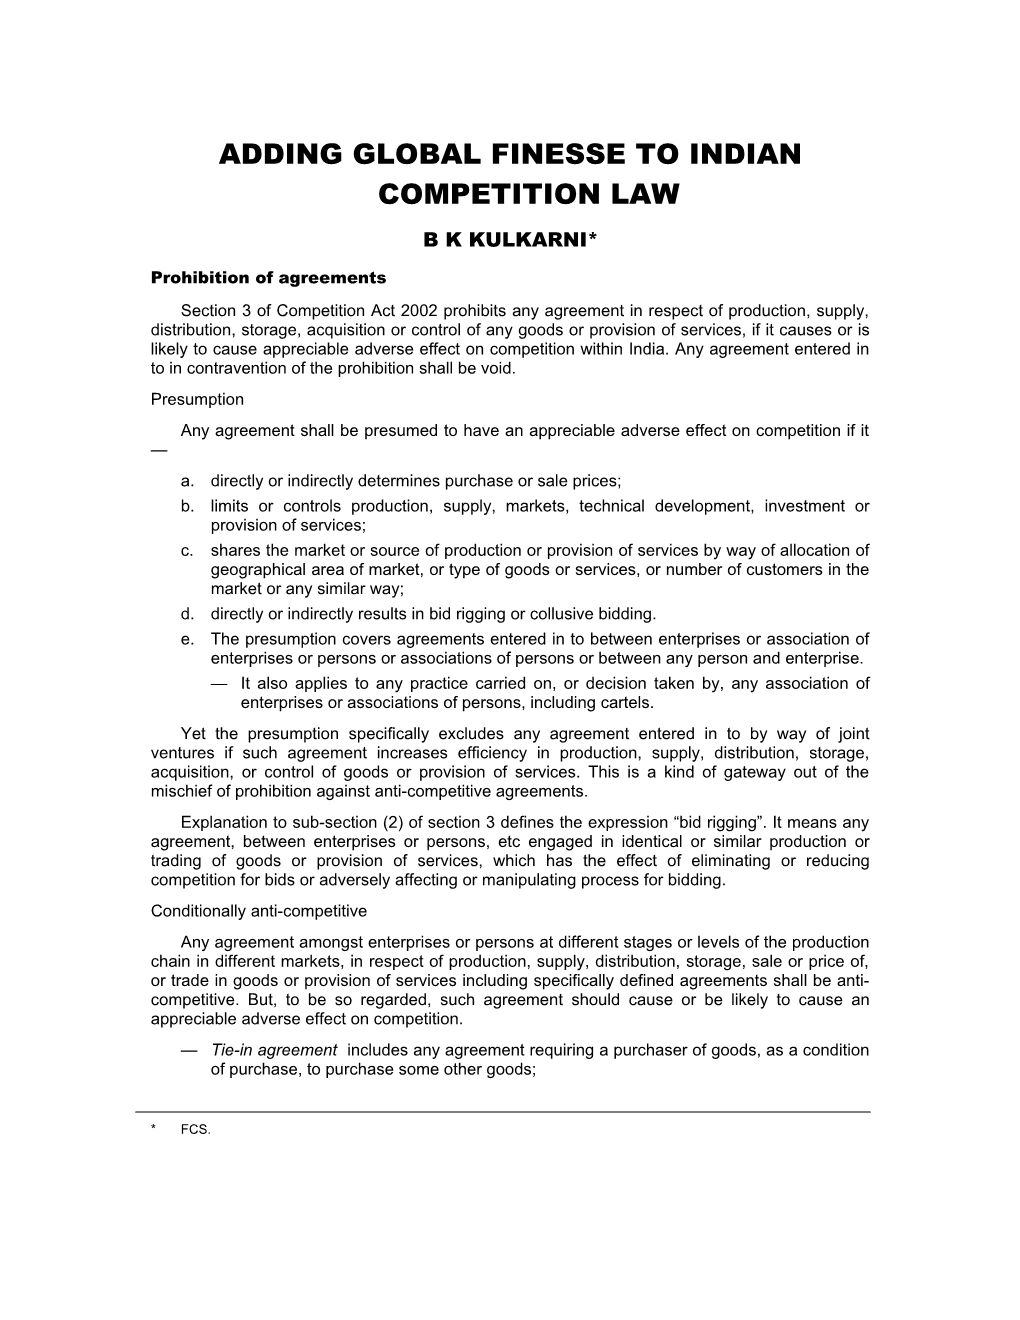 Adding Global Finesse to Indian Competition Law